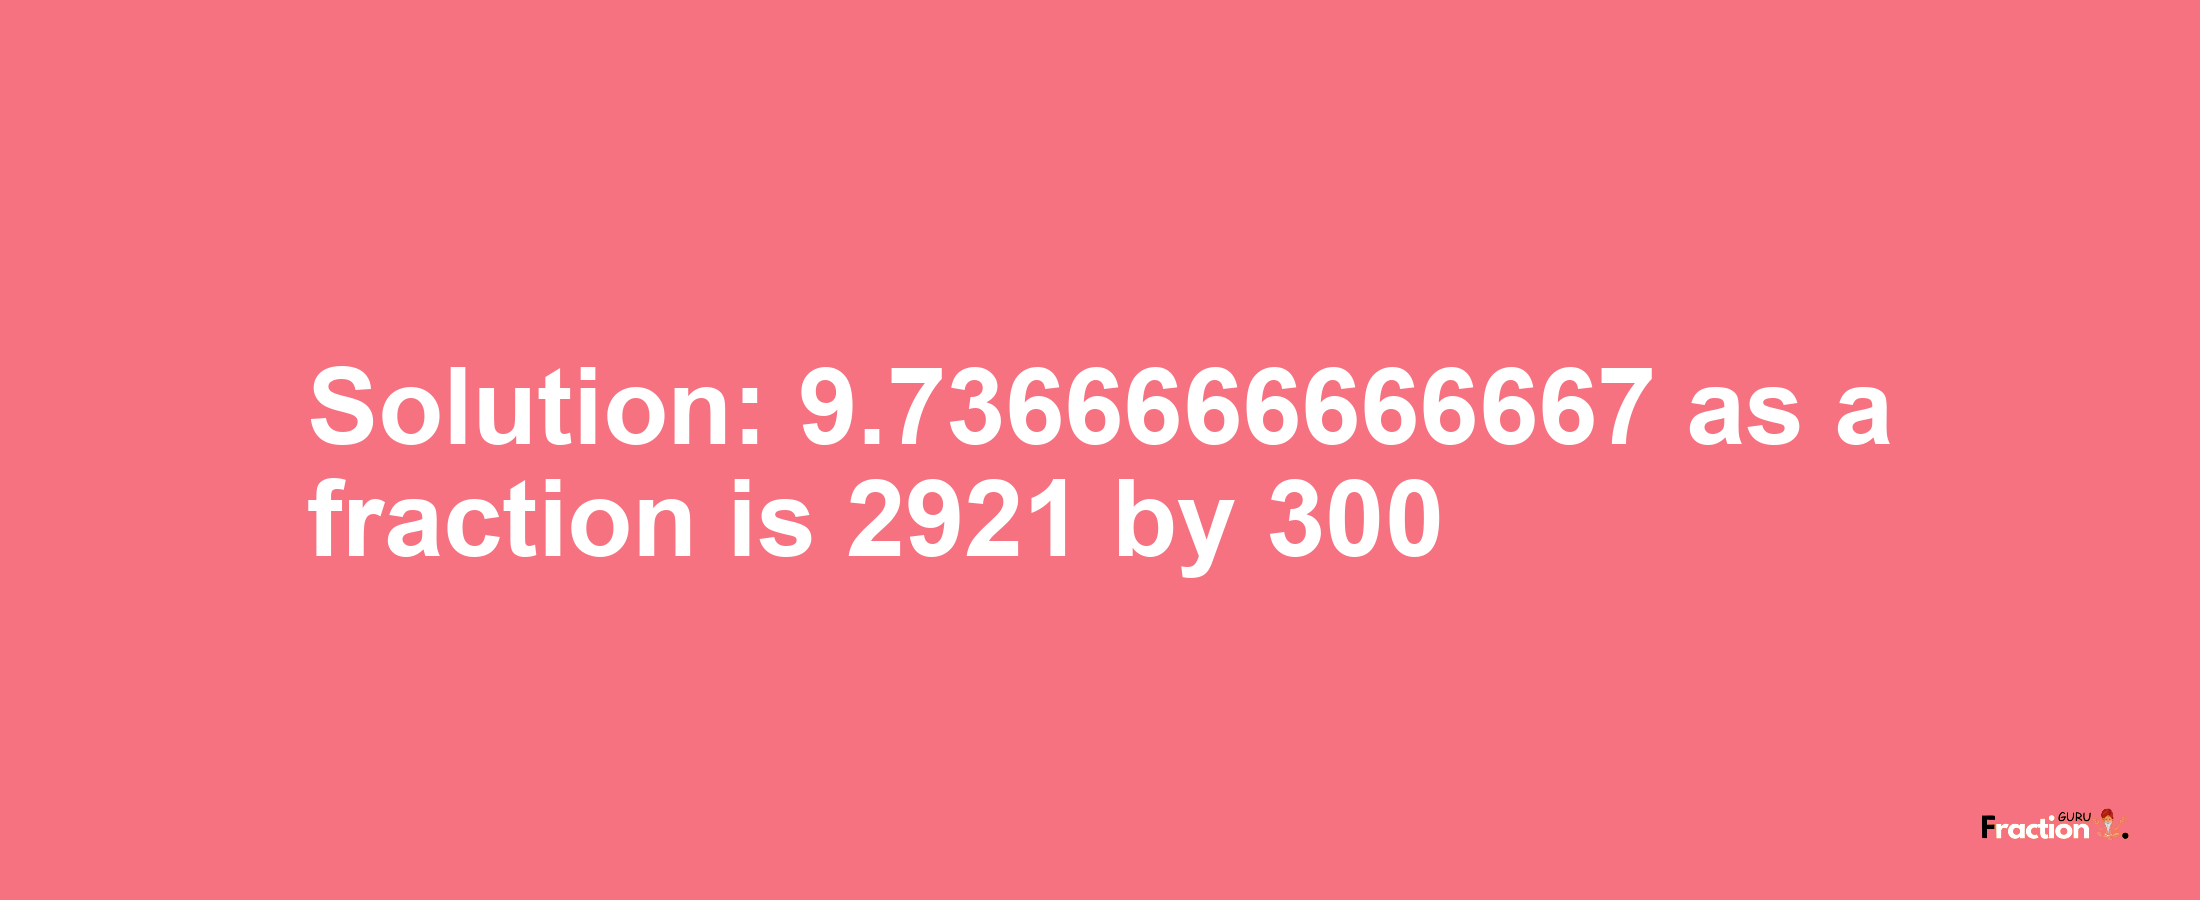 Solution:9.7366666666667 as a fraction is 2921/300